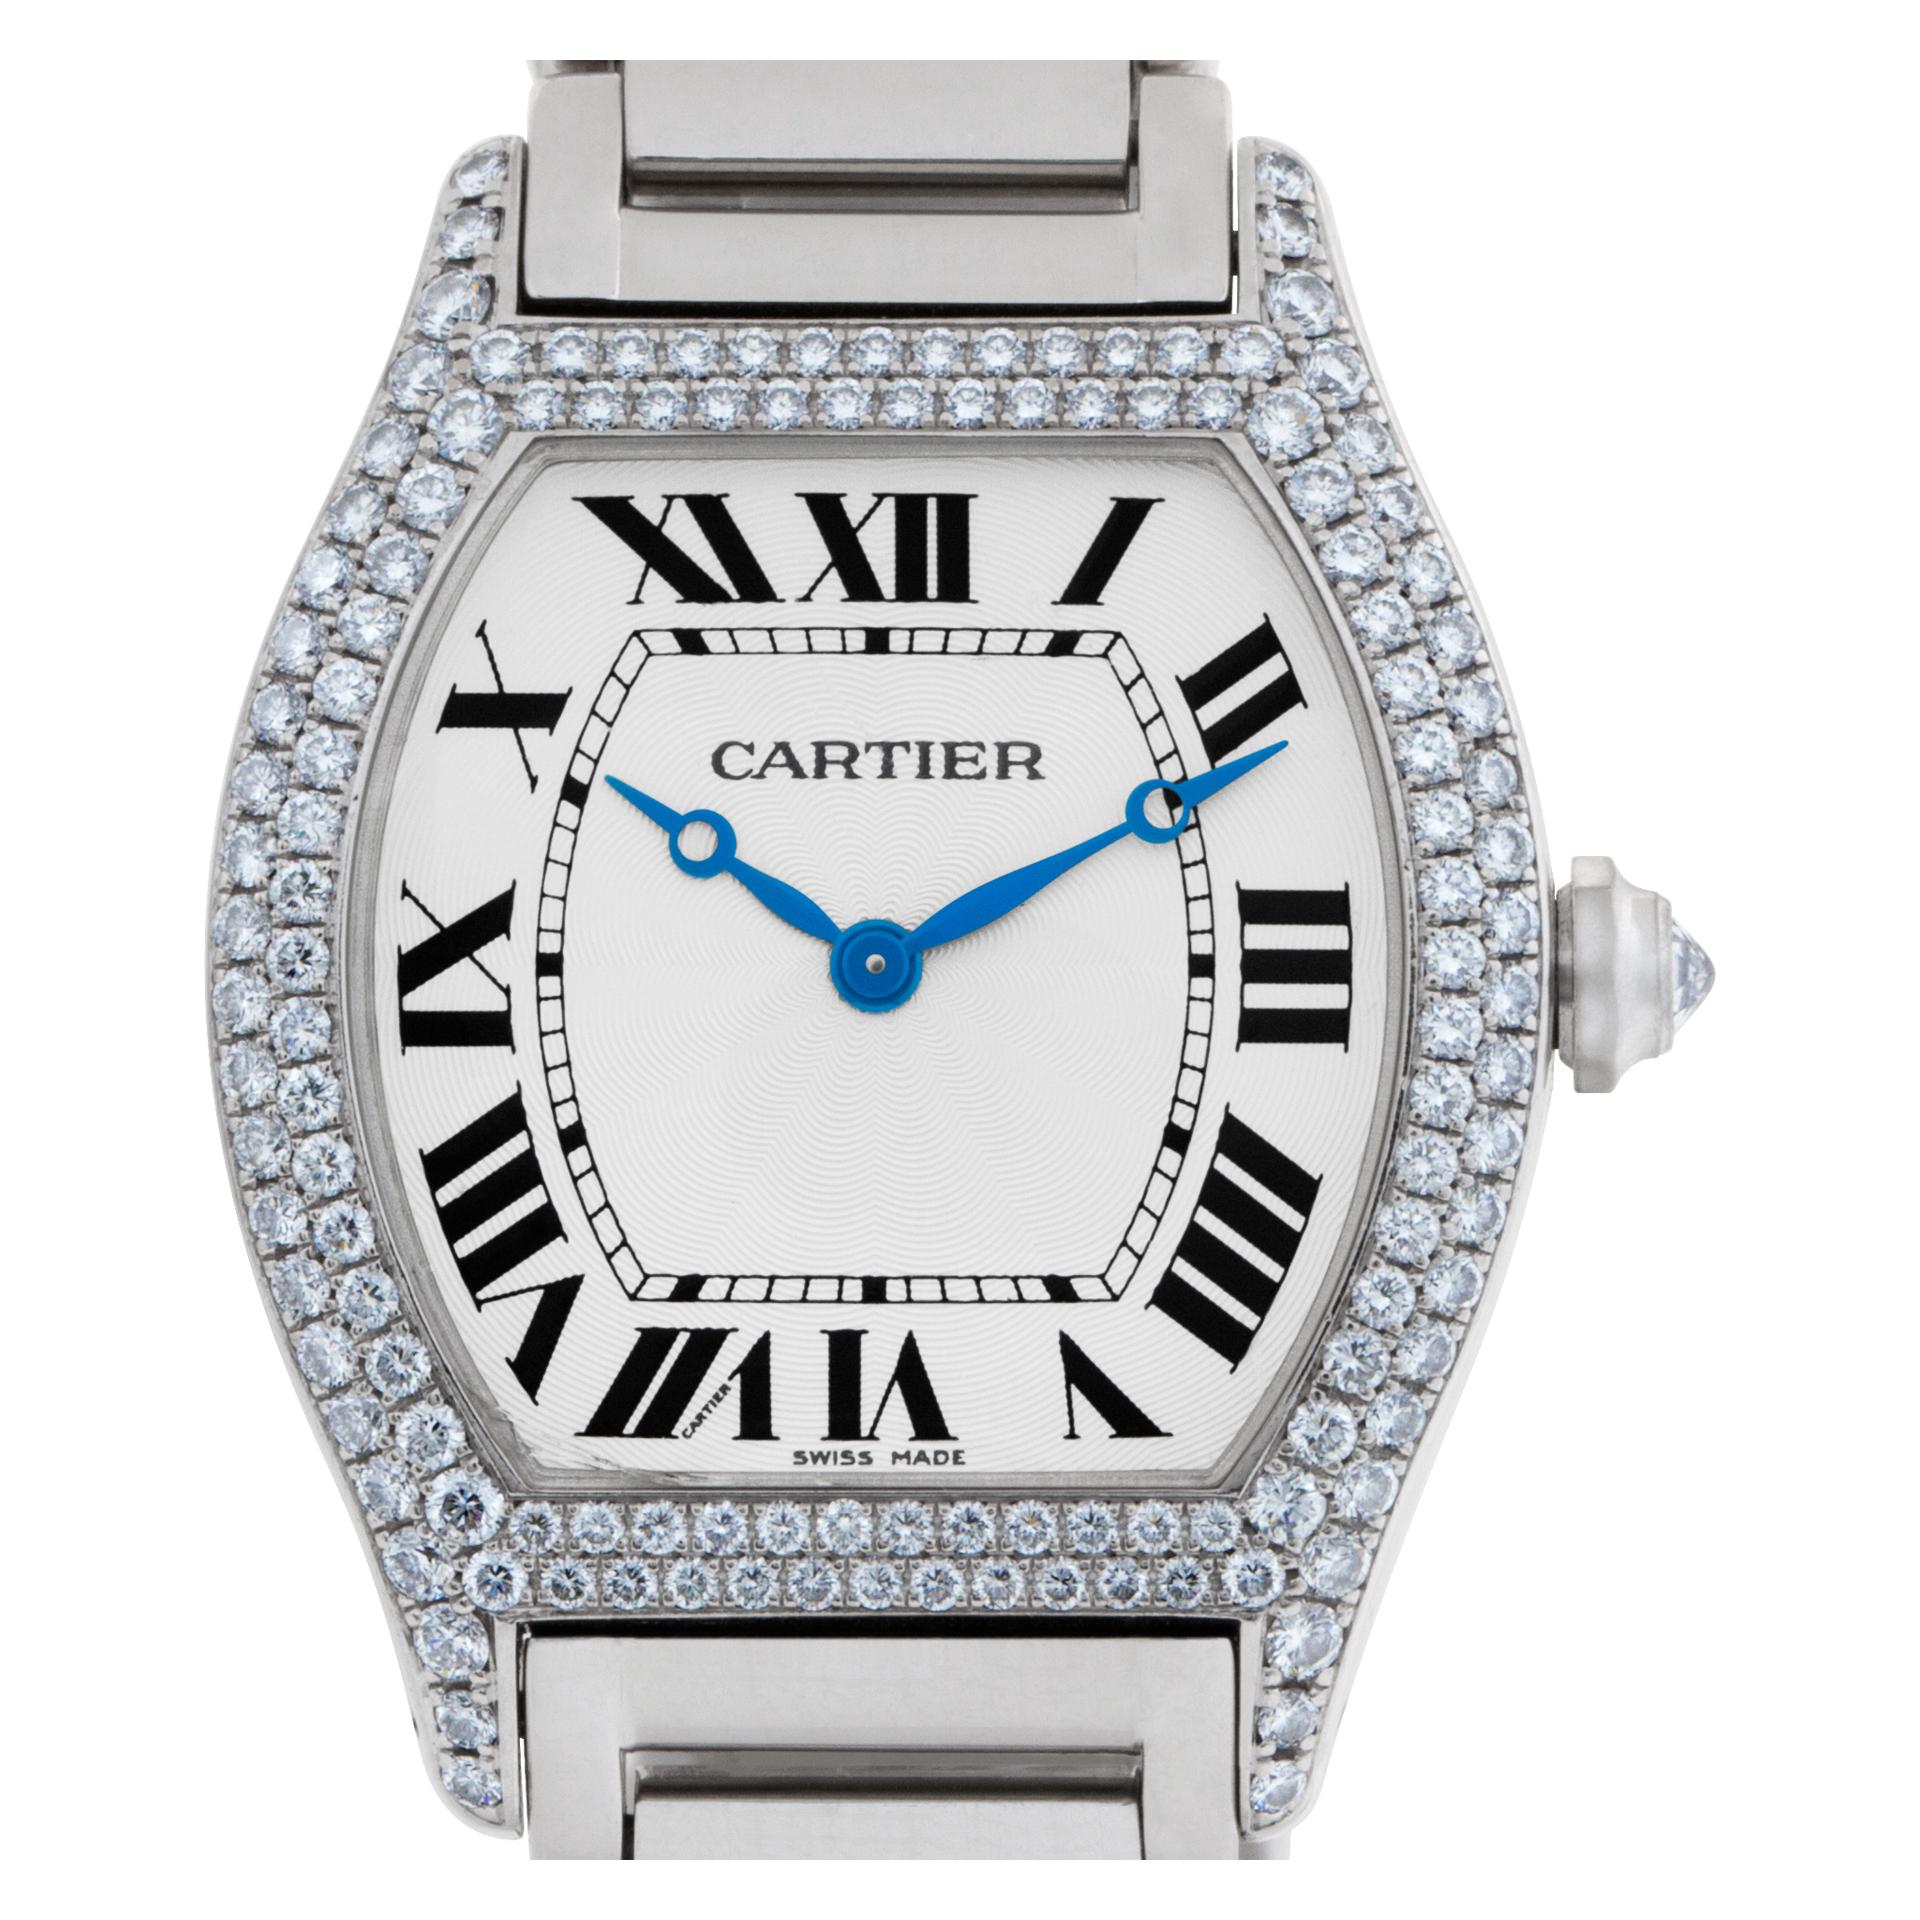 ESTIMATED RETAIL $59,000.00 YOUR PRICE $39,500.00 - 100% AUTHENTIC, FACTORY ORIGINAL - Cartier Tortue with double row diamond bezel in 18k white gold. Manual. 34 mm case size. With box and papers. Ref W518457.  Dress Cartier Tortue W518457 watch is